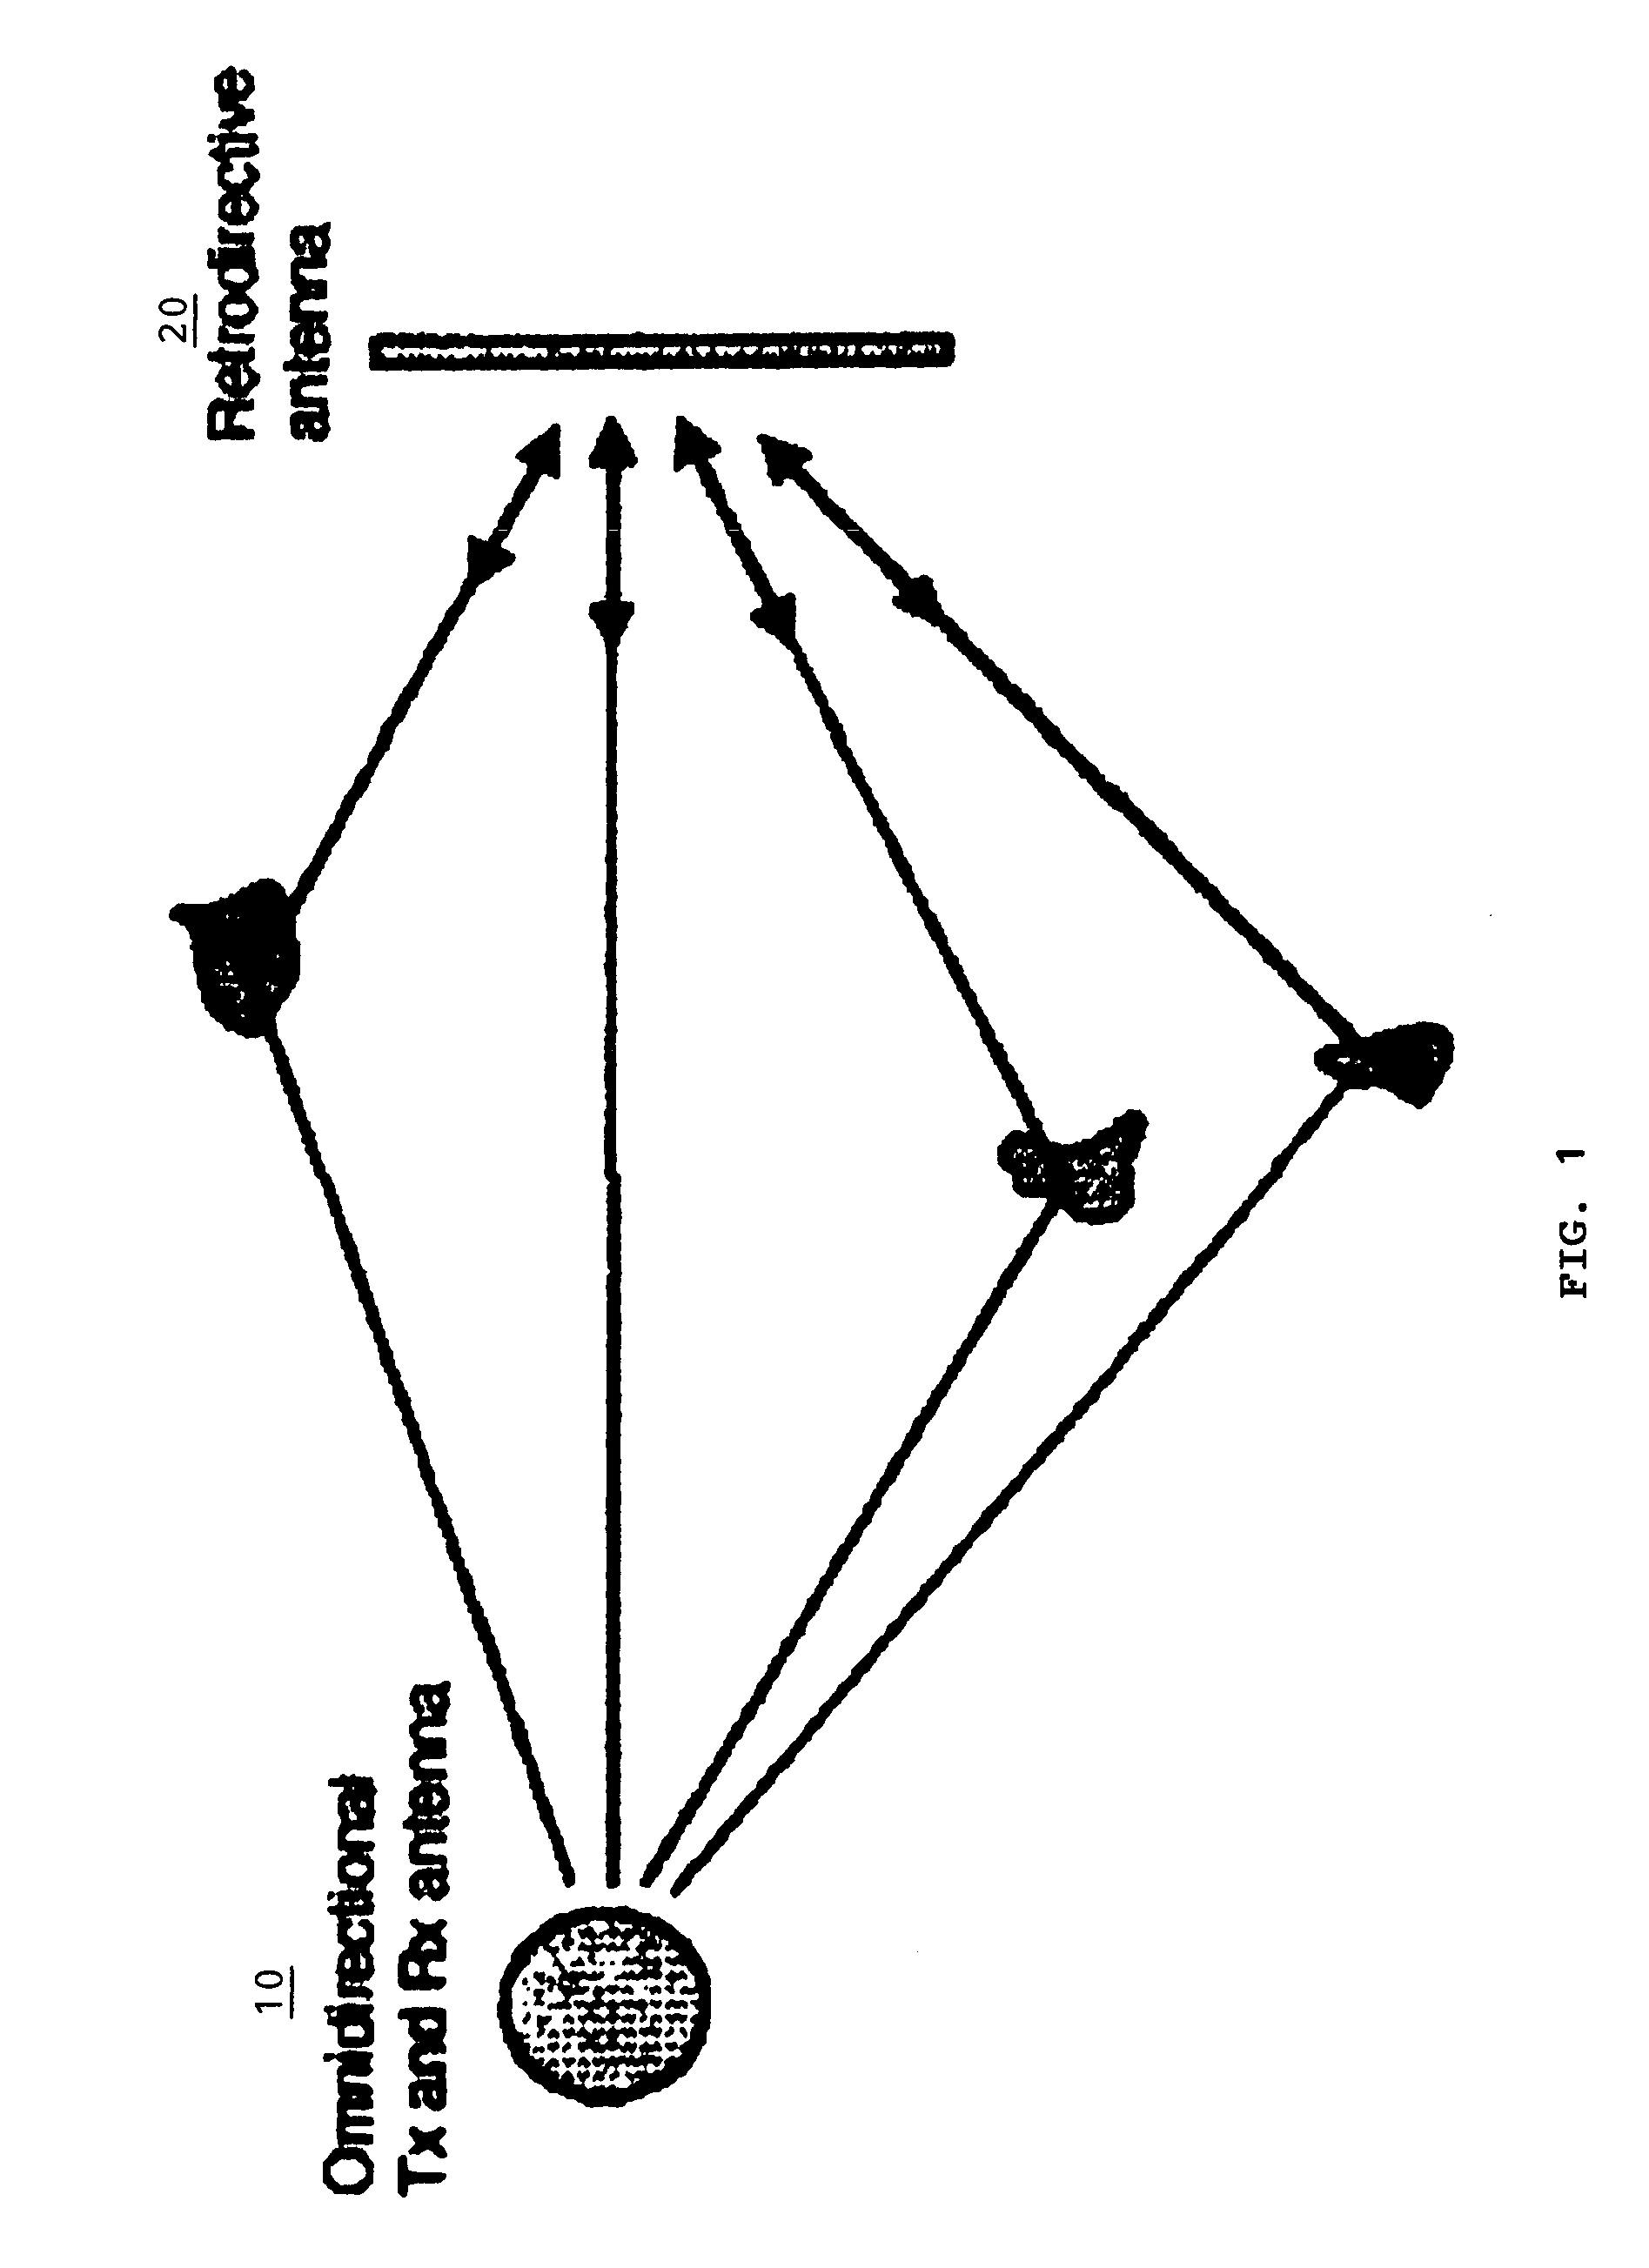 Method for employing multipath propagation in wireless radio communications